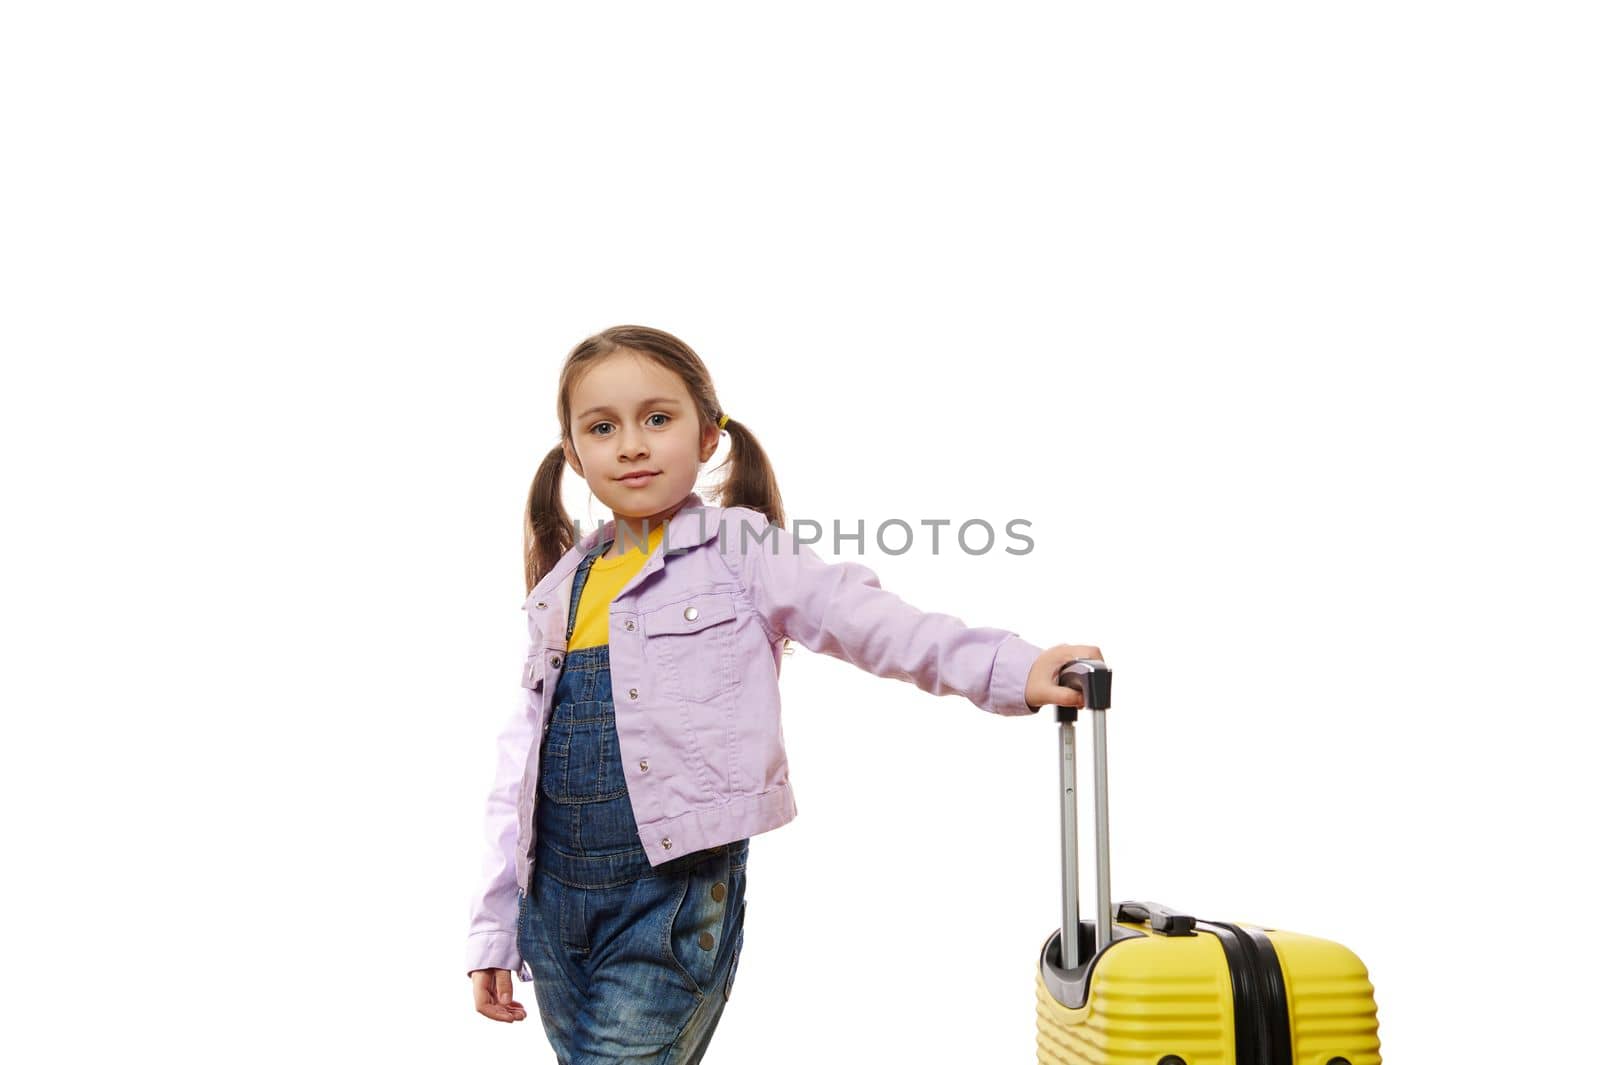 Happy little child girl in purple denim jacket, posing with yellow suitcase over white background with copy space for ad by artgf